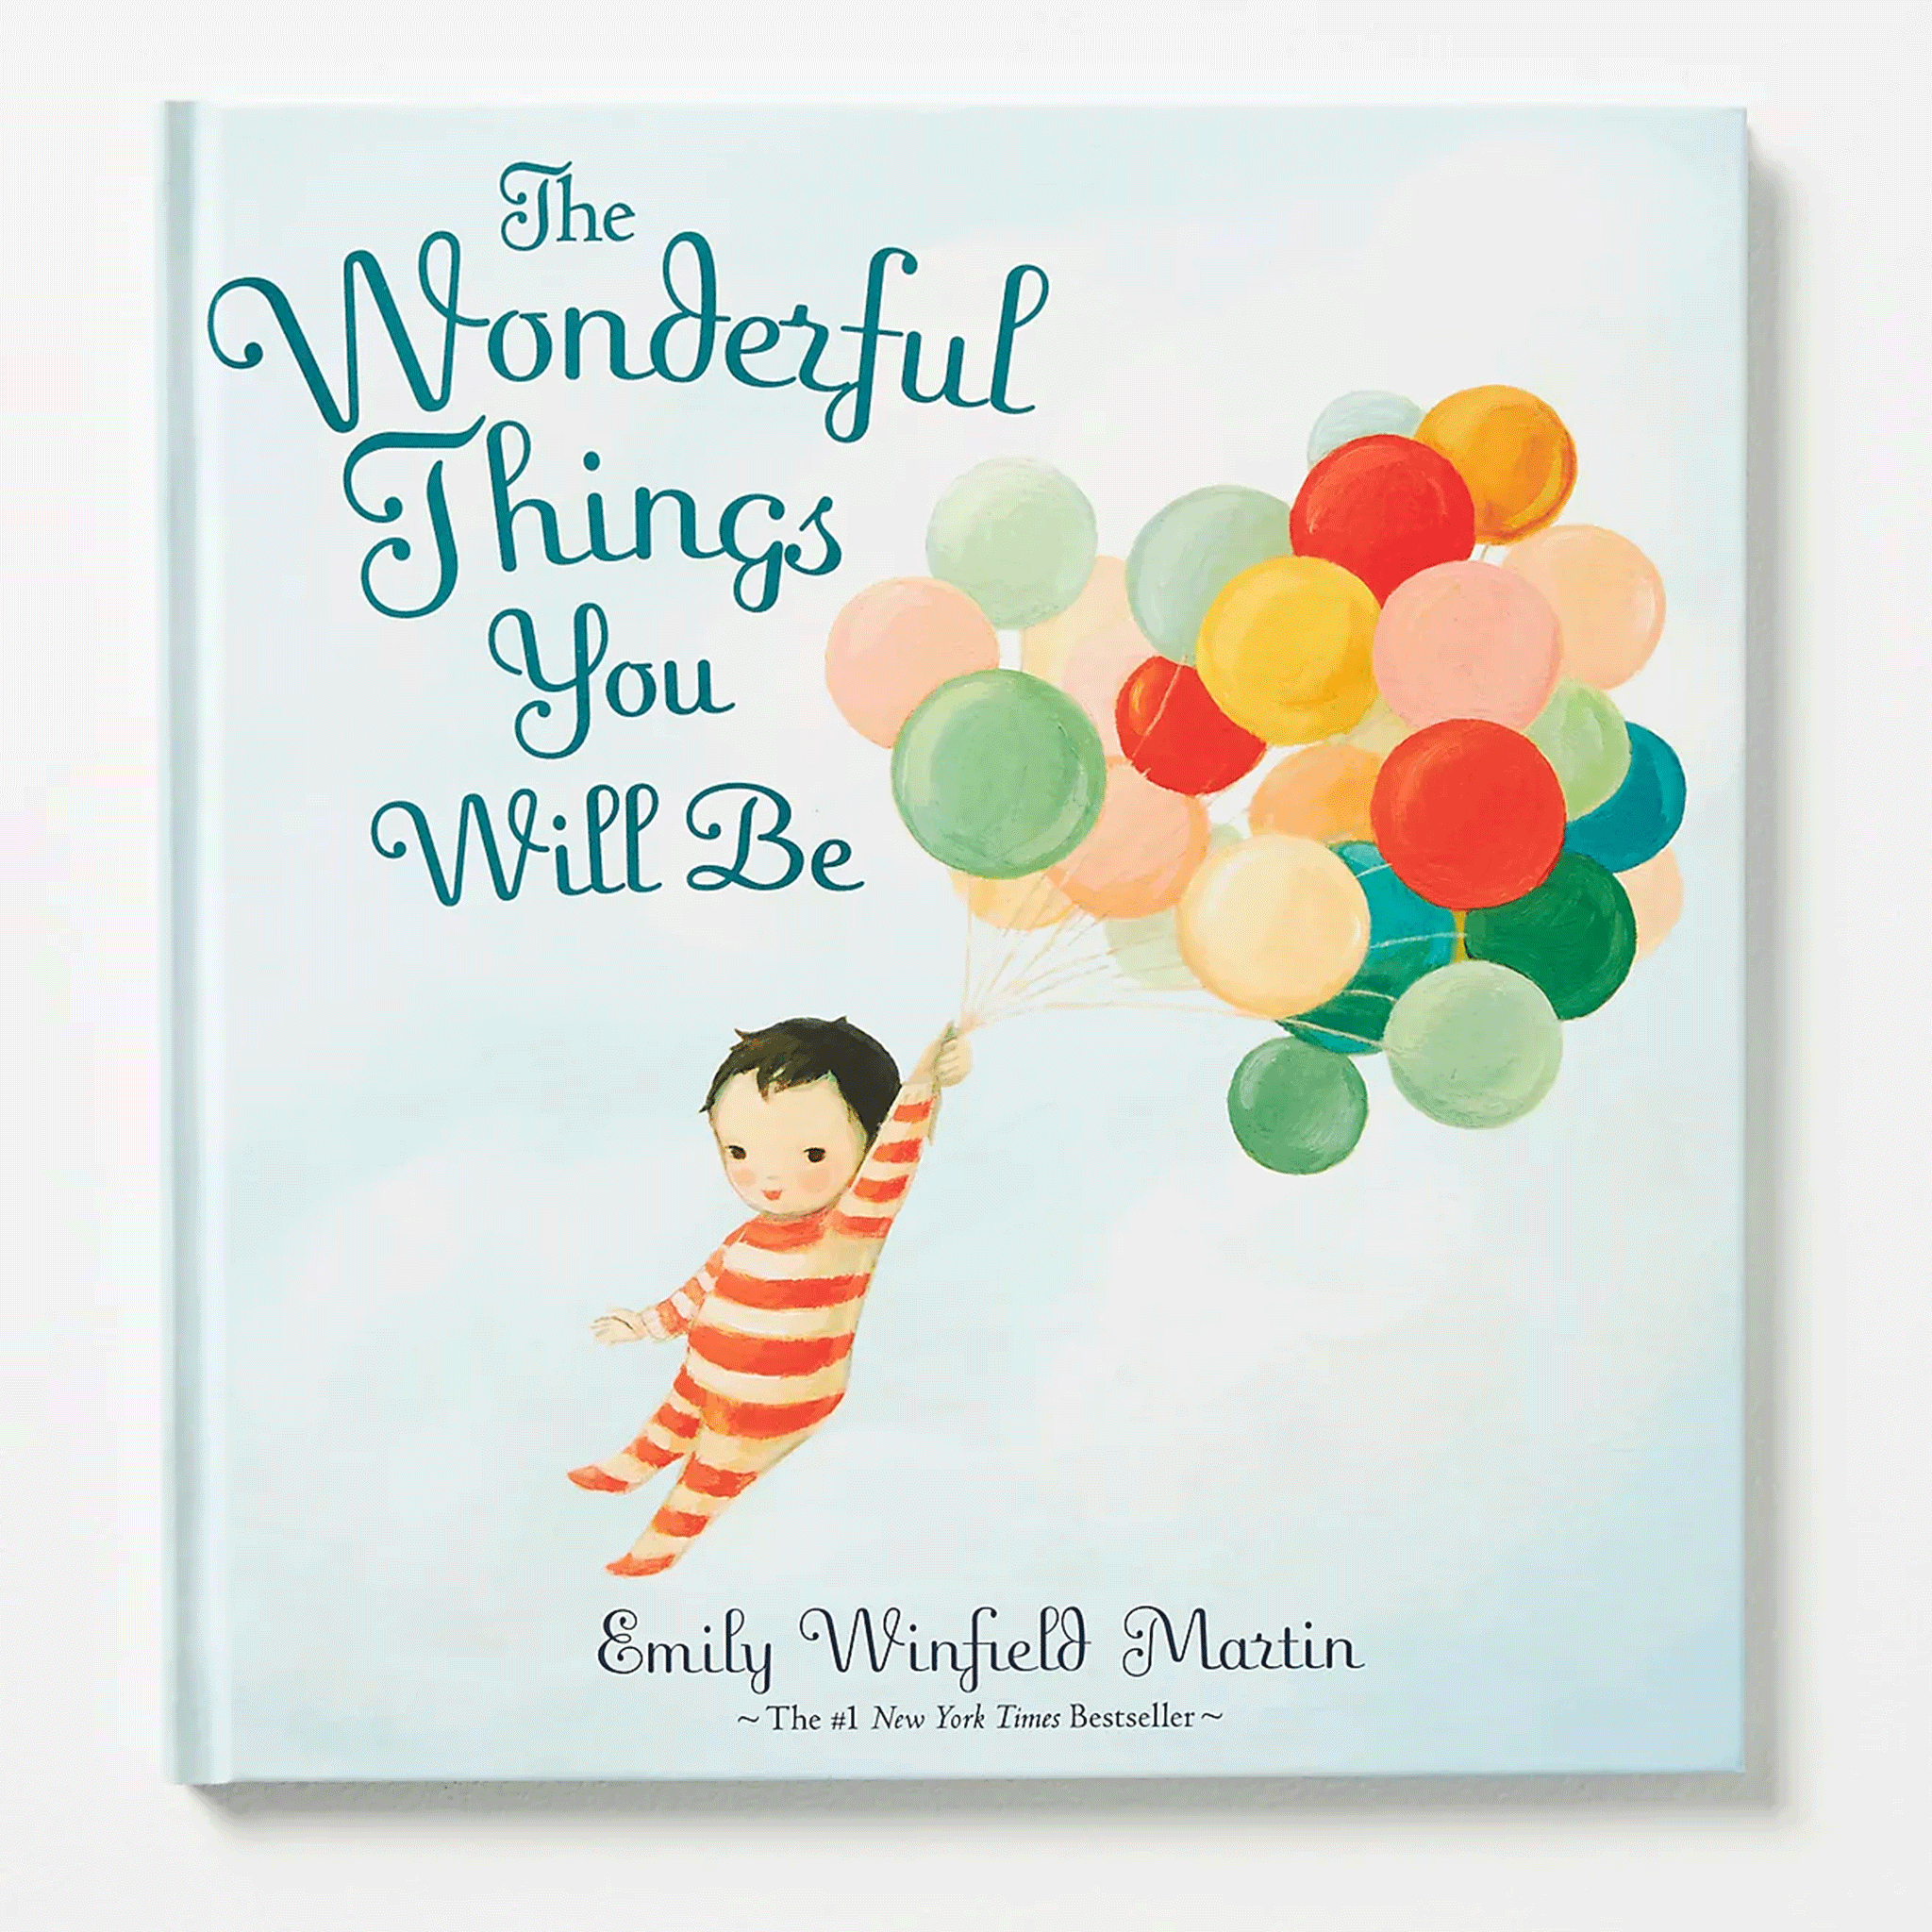 A young boy in red striped pajamas grips a bunch of colorful balloons, floating across the cover of the book. The title reads &#39;The Wonderful Things You Will Be&#39; in deep teal lettering.